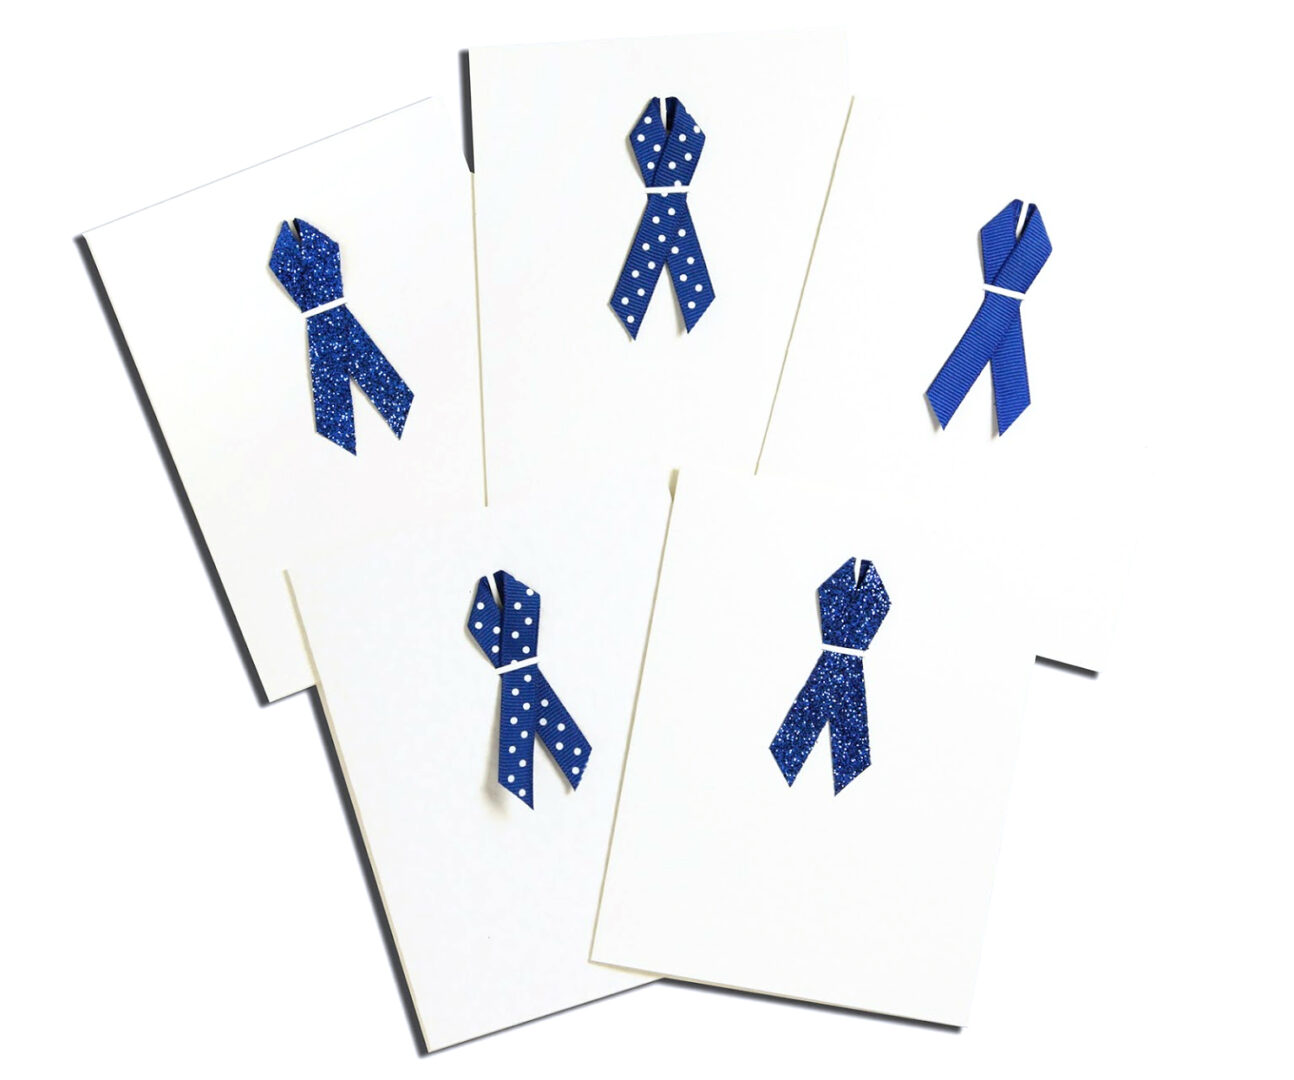 A group of cards with blue ribbons on them.